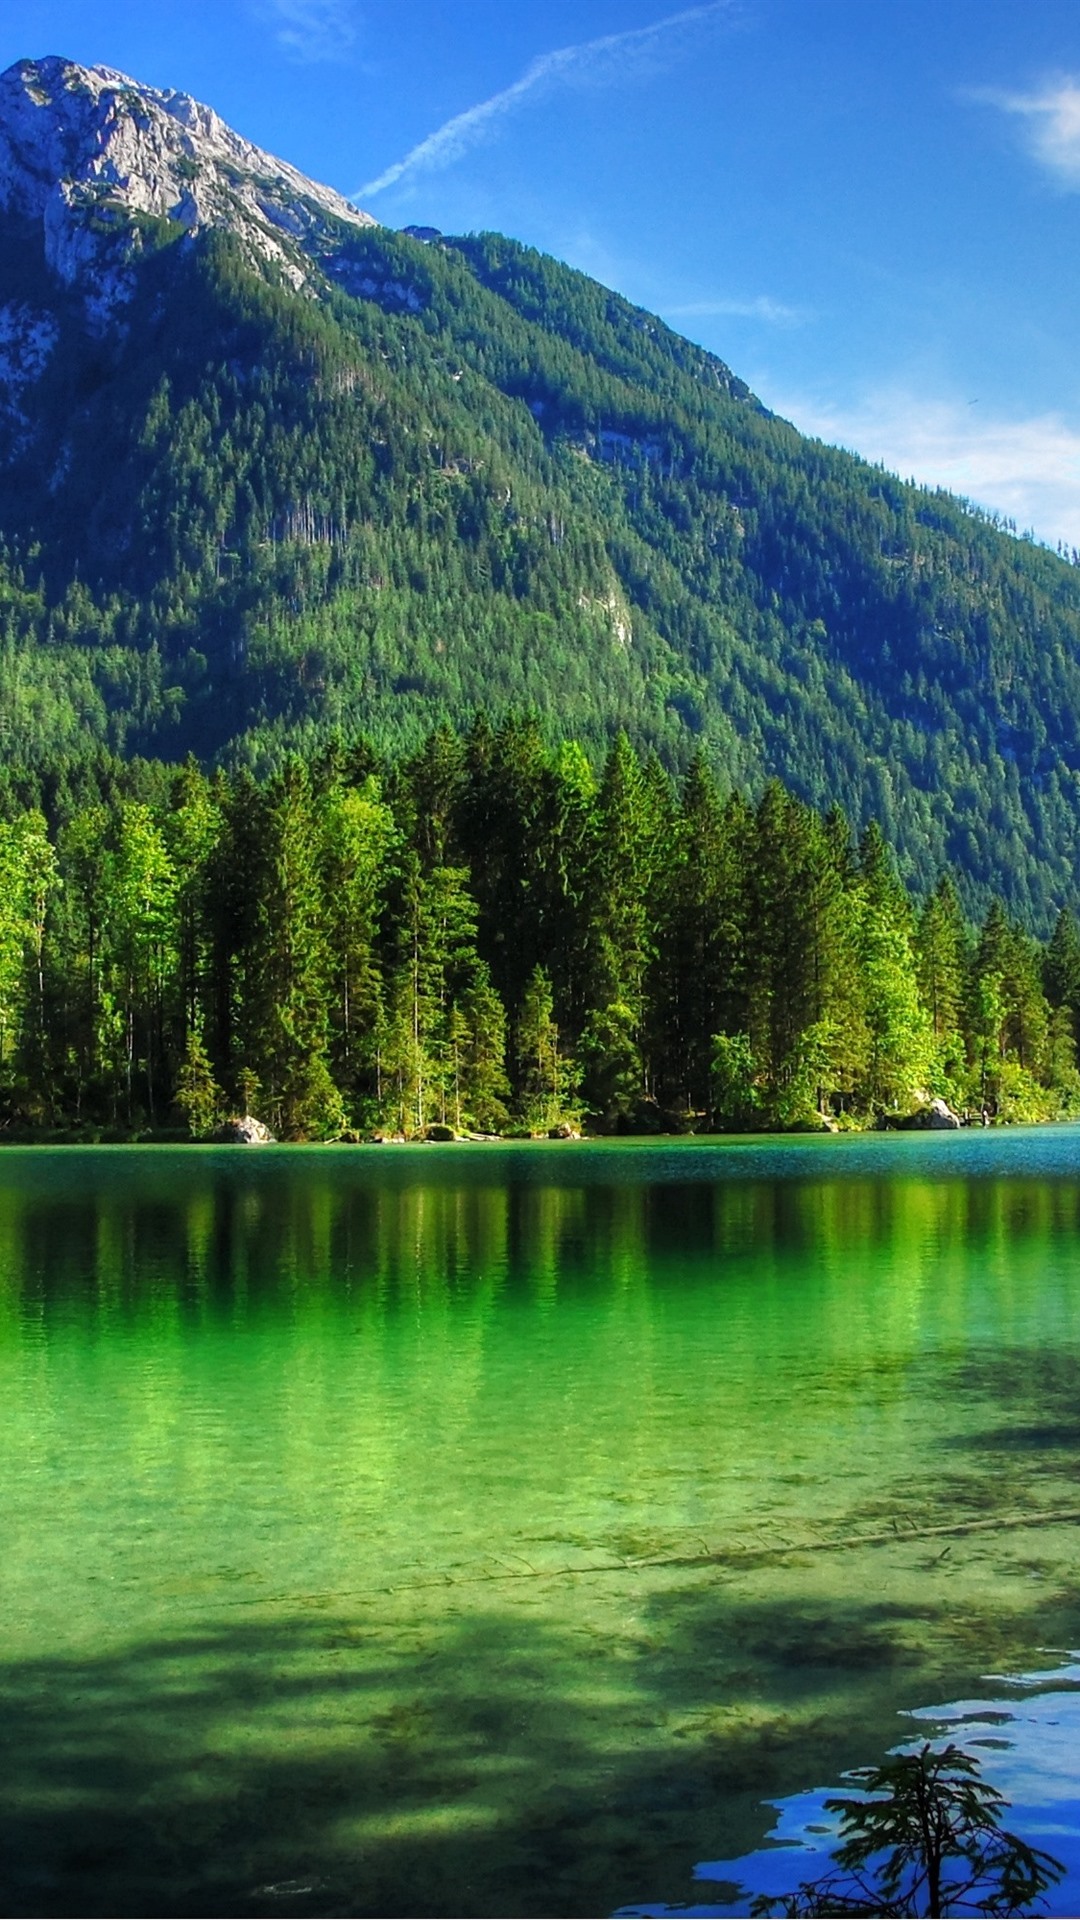 Clear Water, Lake, Trees, Mountains, Summer 1080x1920 IPhone 8 7 6 6S Plus Wallpaper, Background, Picture, Image